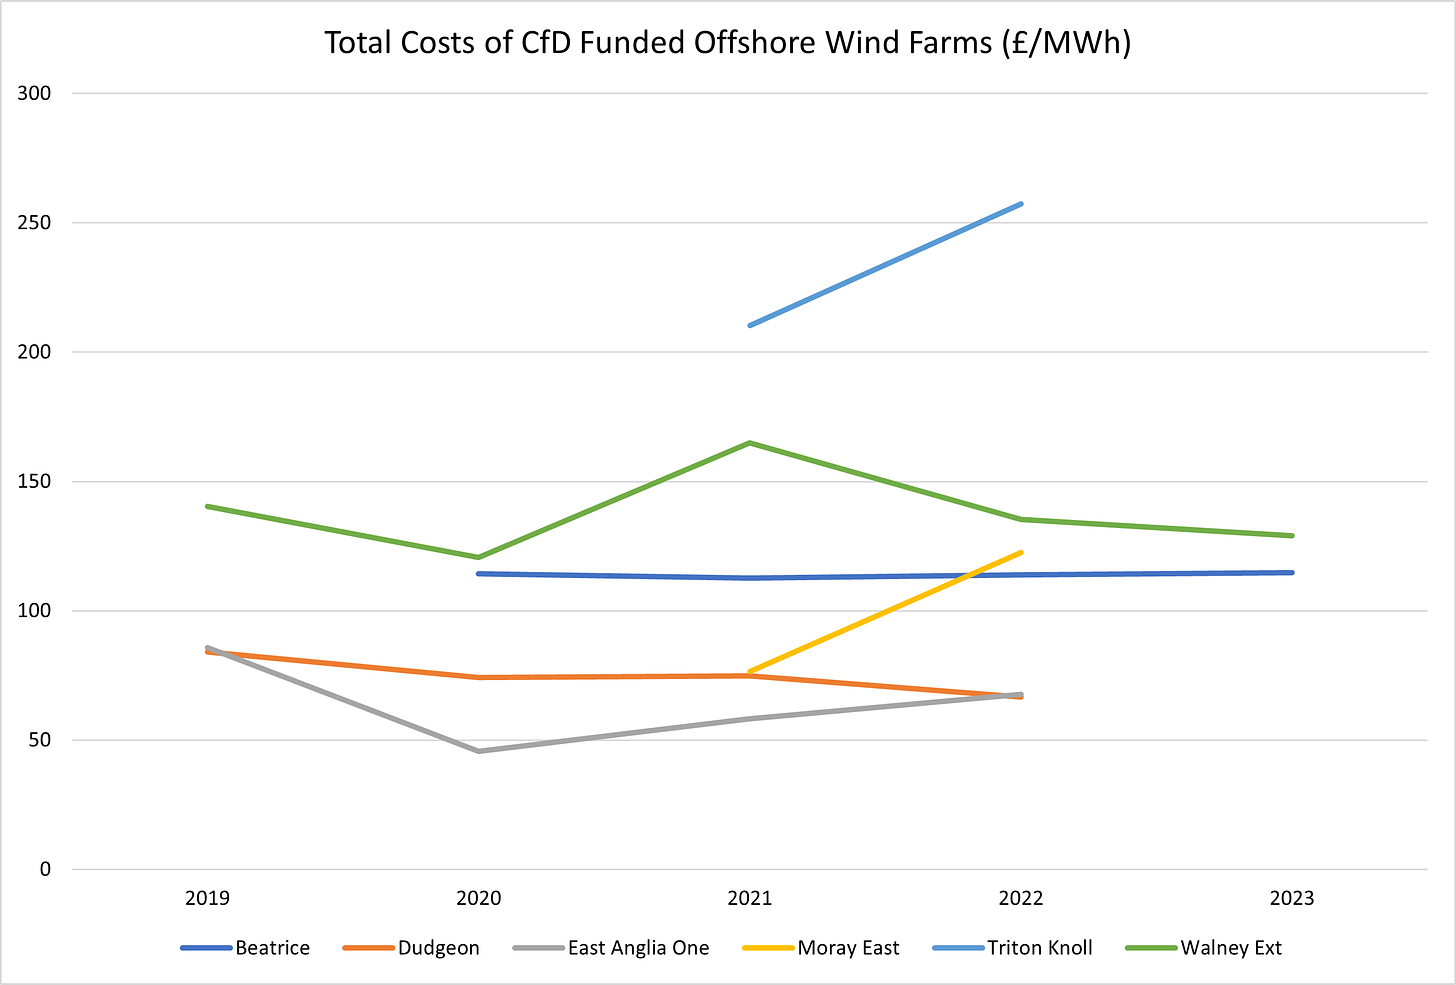 Figure 6 - Total Costs of CfD Funded Offshore Windfarms (£ per MWh)